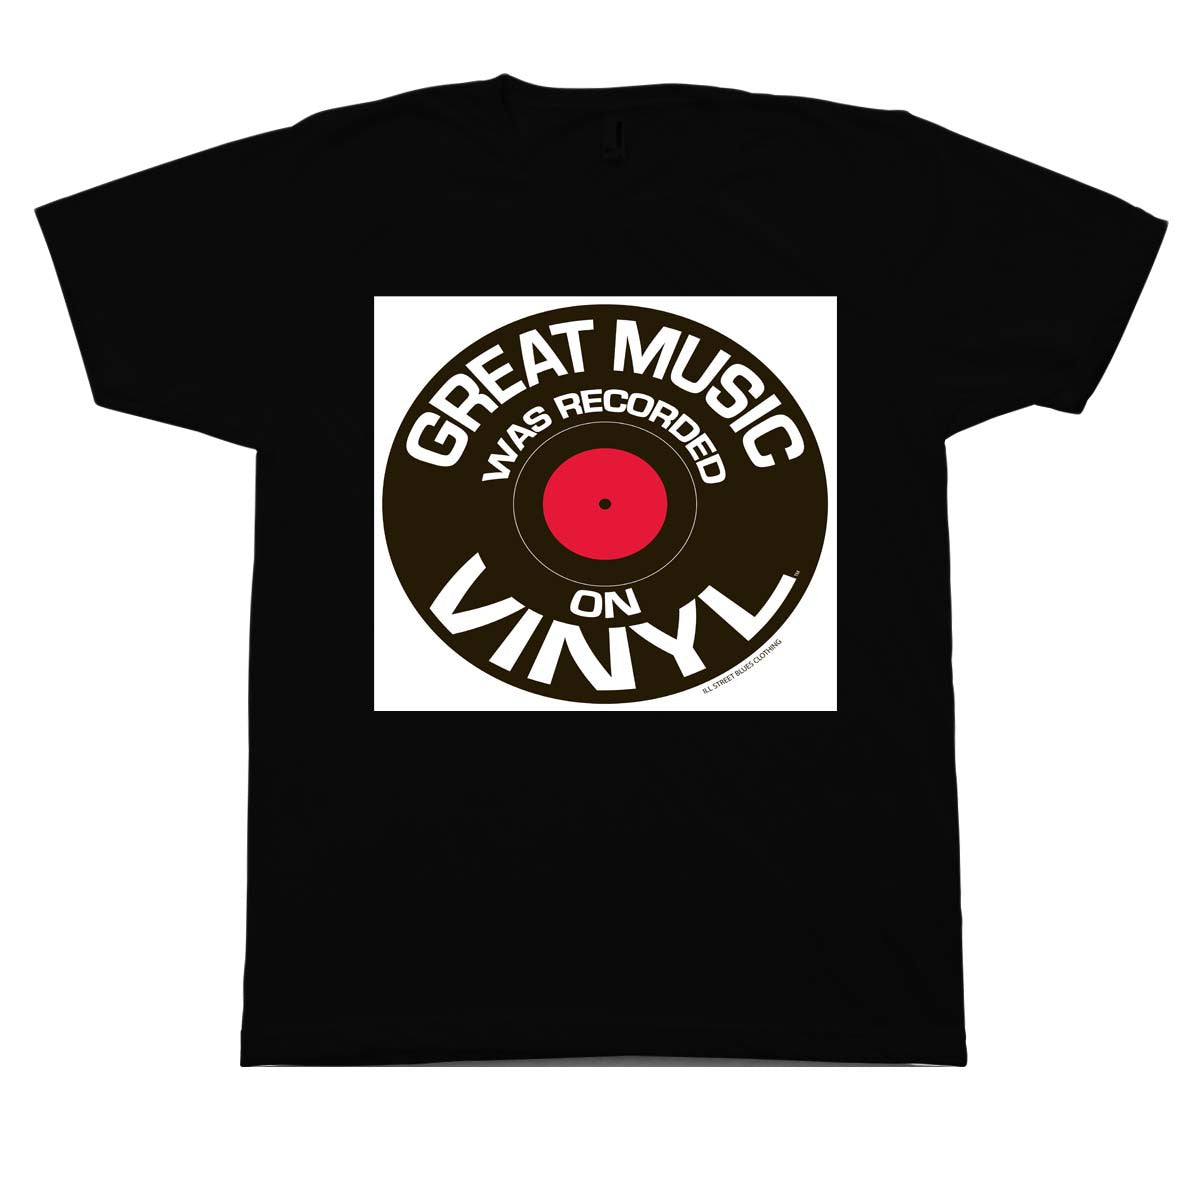 Great Music was Recorded on Vinyl Black T-Shirt